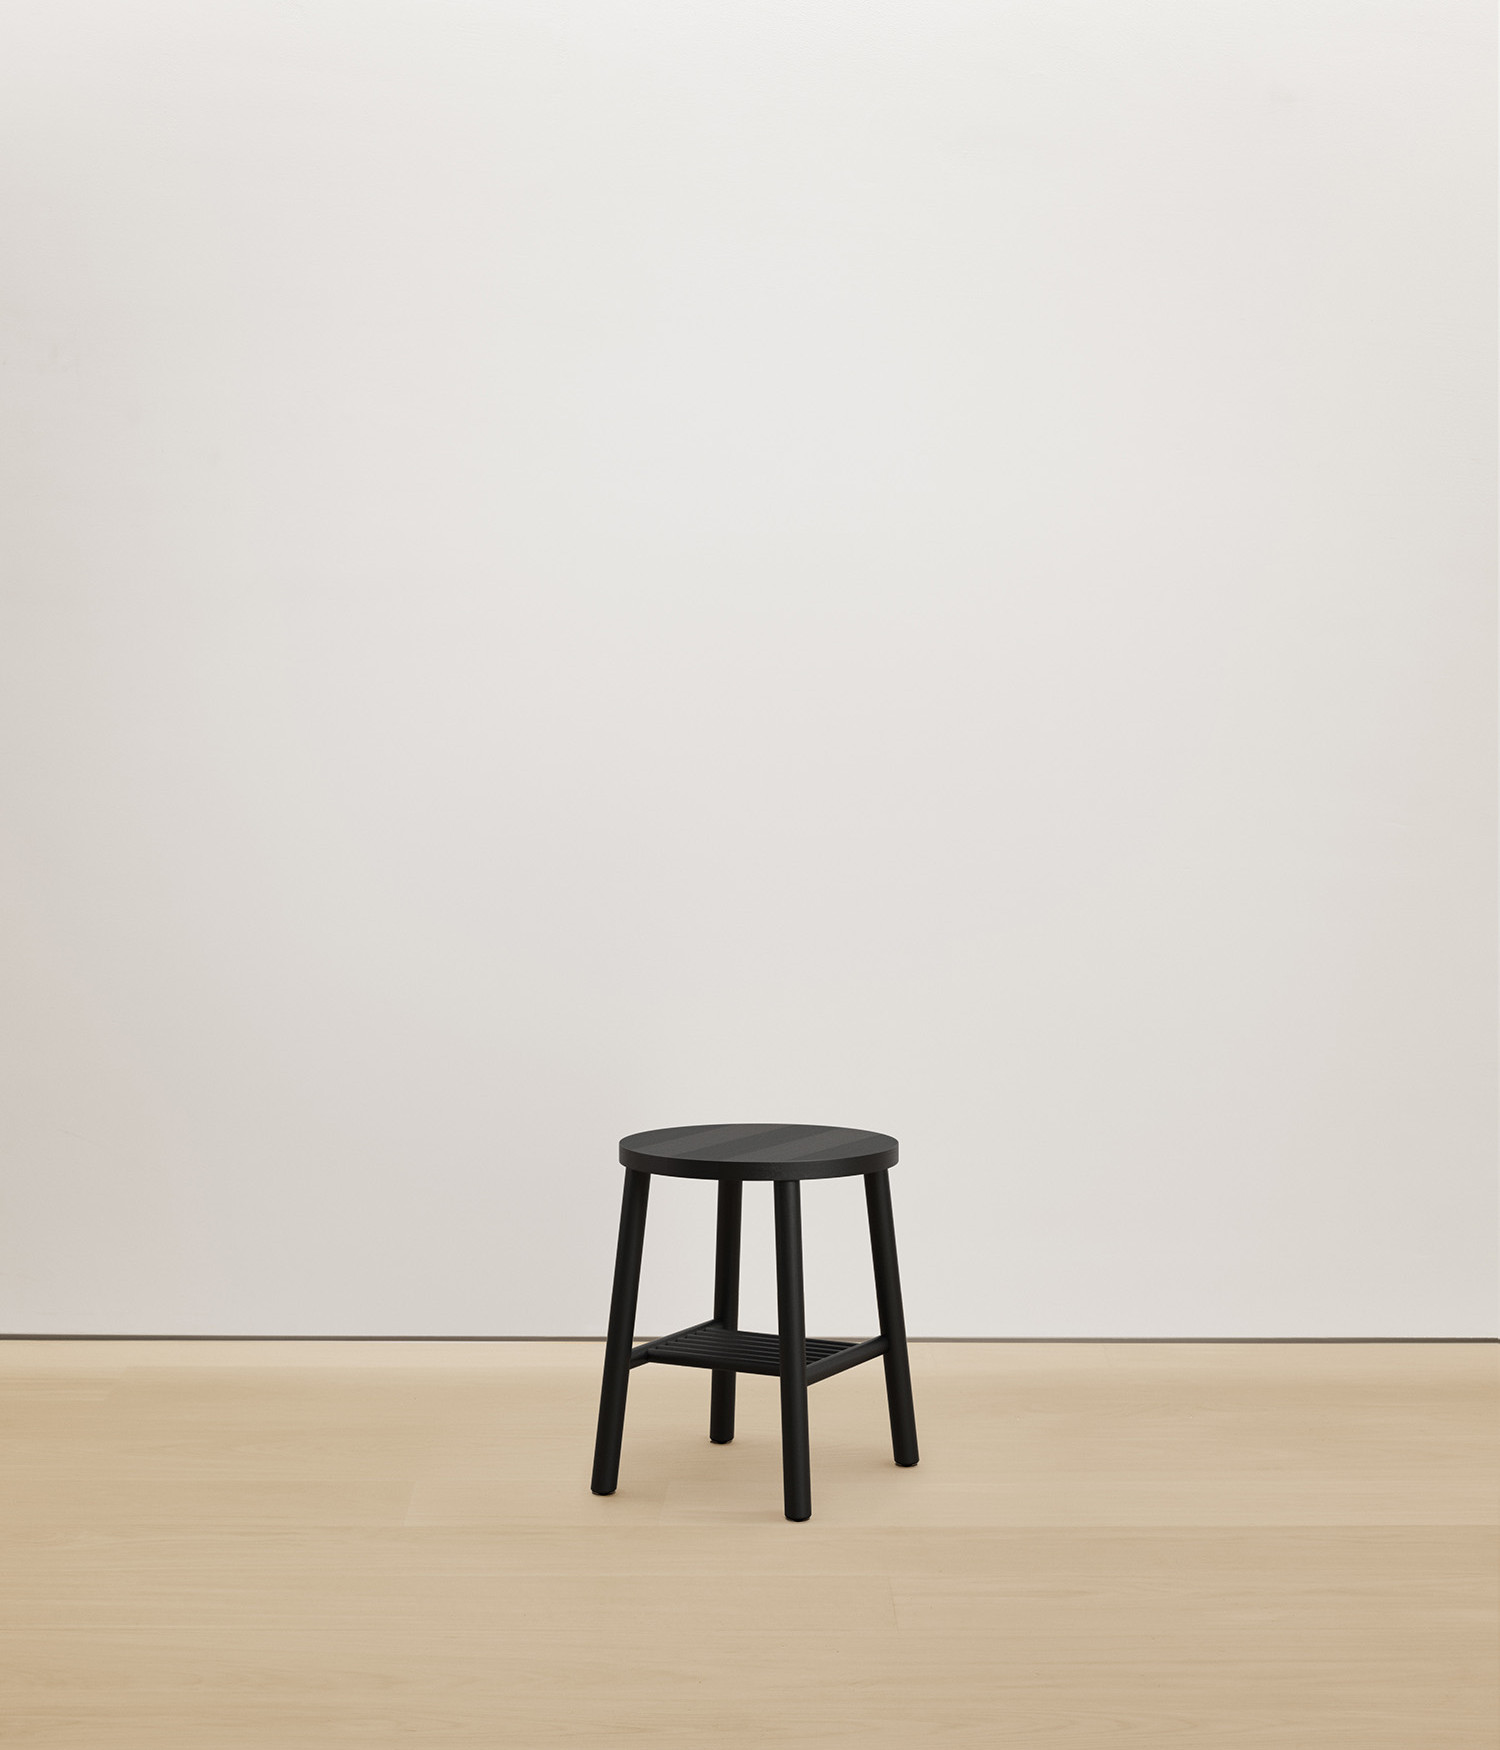  black-stained-oak stool with solid wood seat